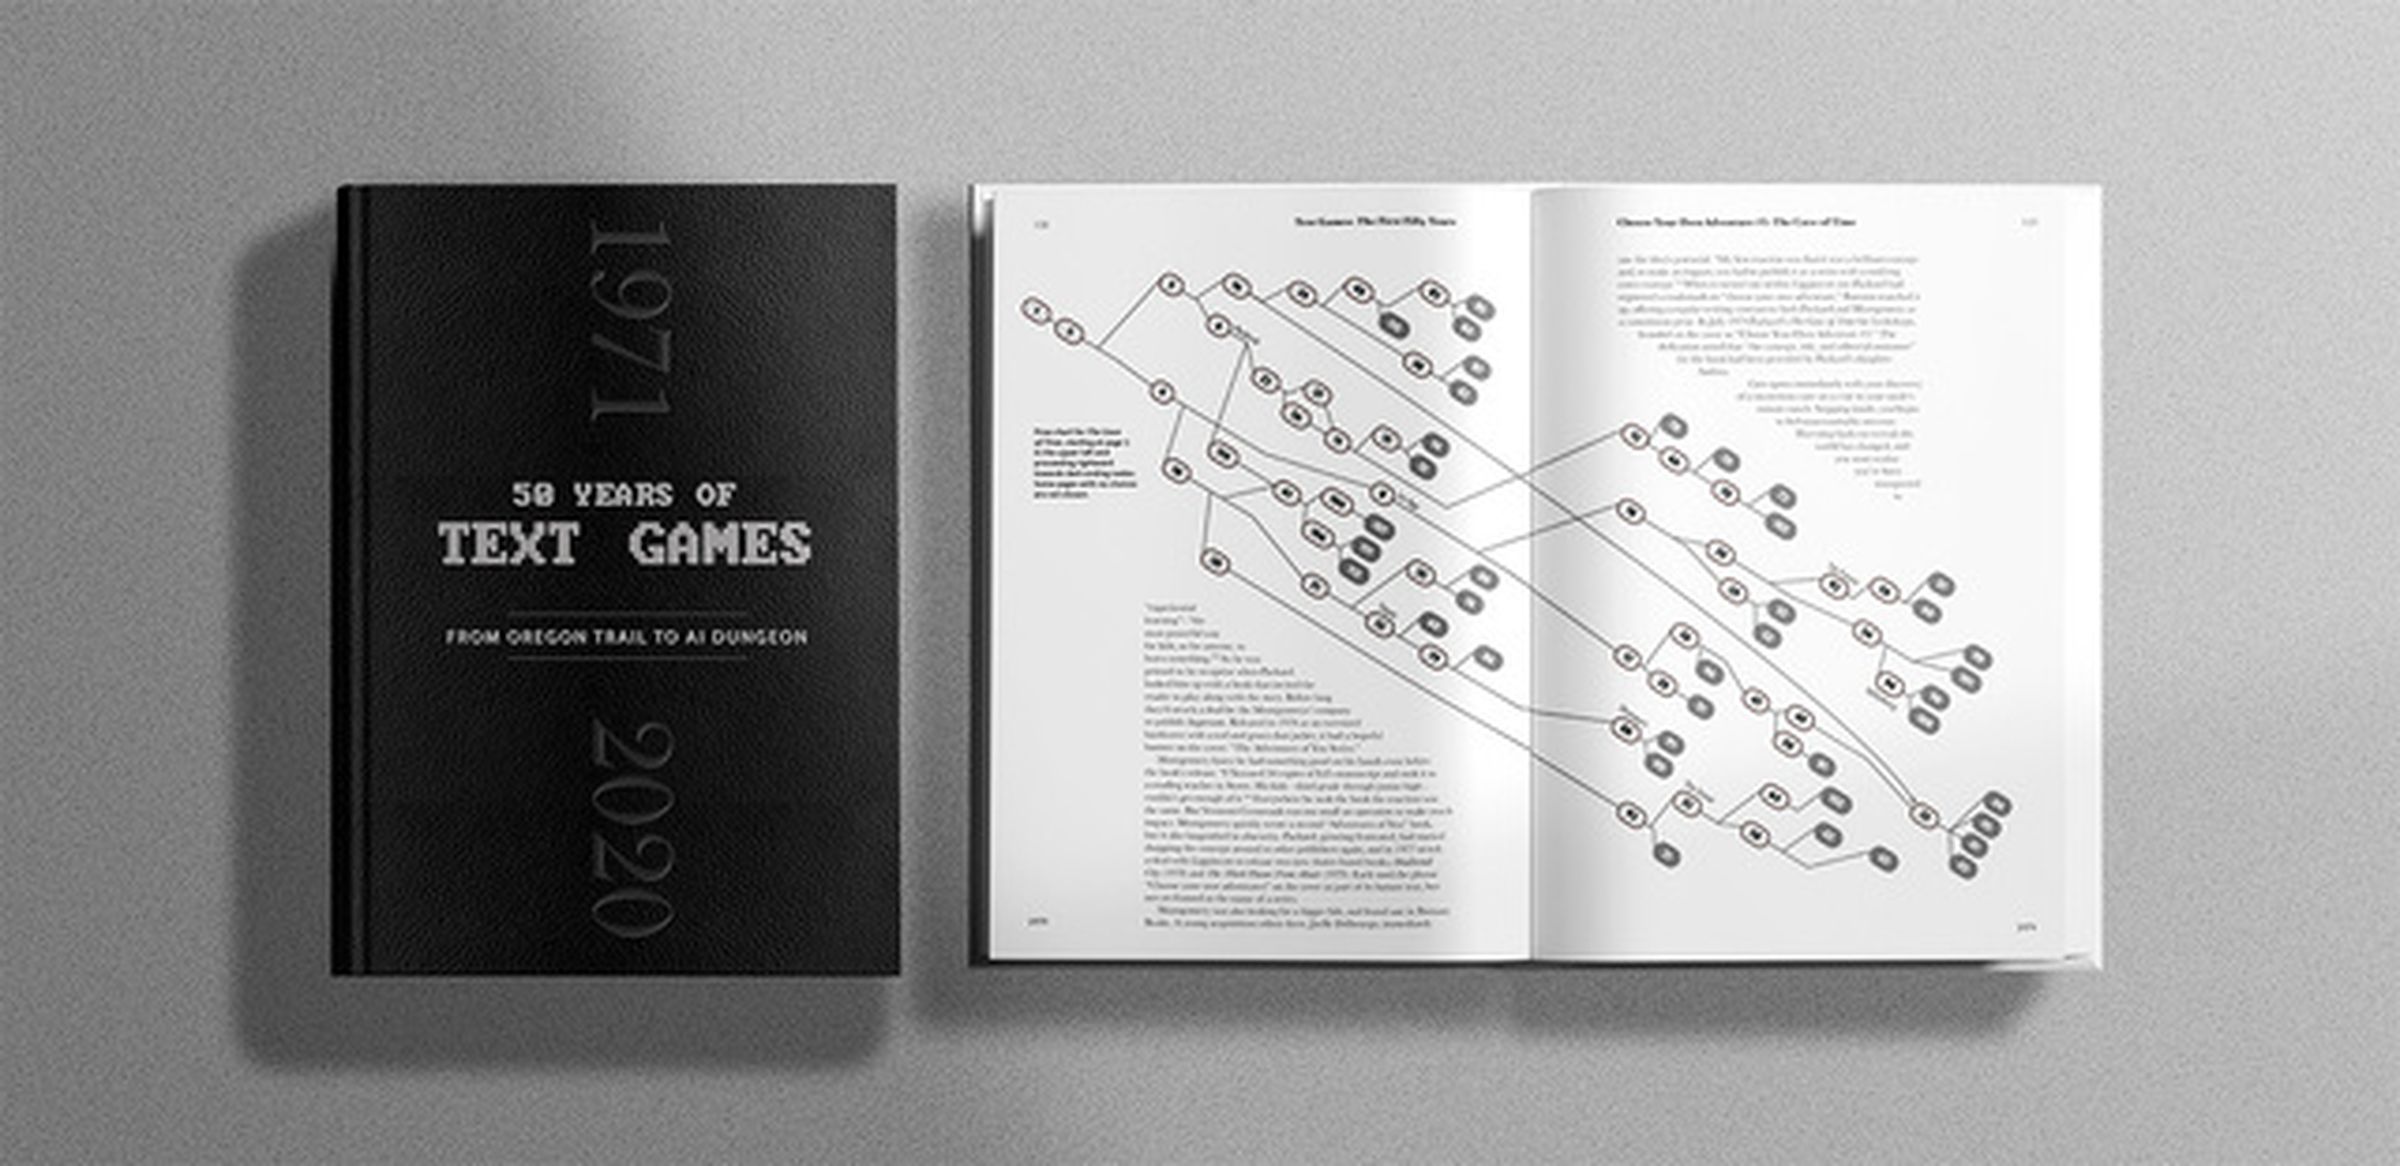 A picture of the book 50 Years of Text Games with a map of branching paths in interactive fiction.